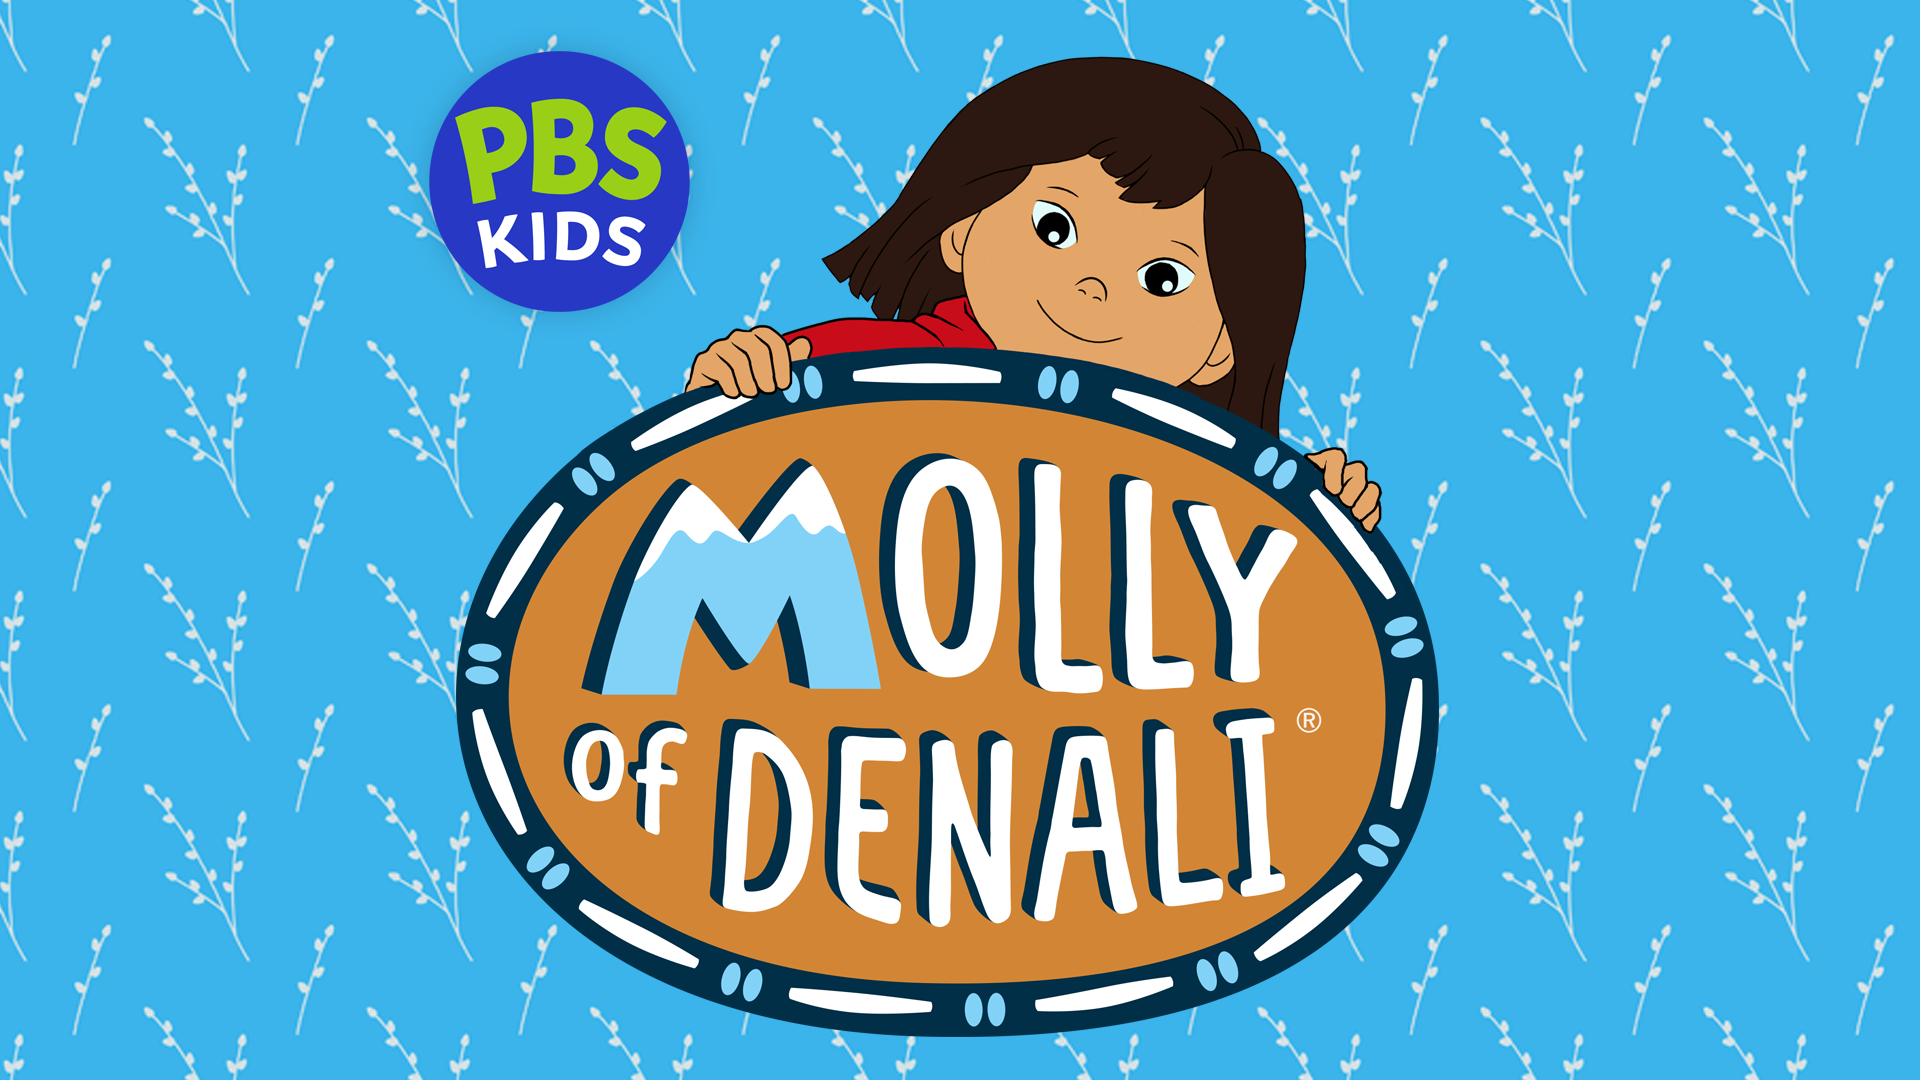 The character Molly of Denali peeks up from behind the Molly of Denali logo against a backdrop wheat pattern